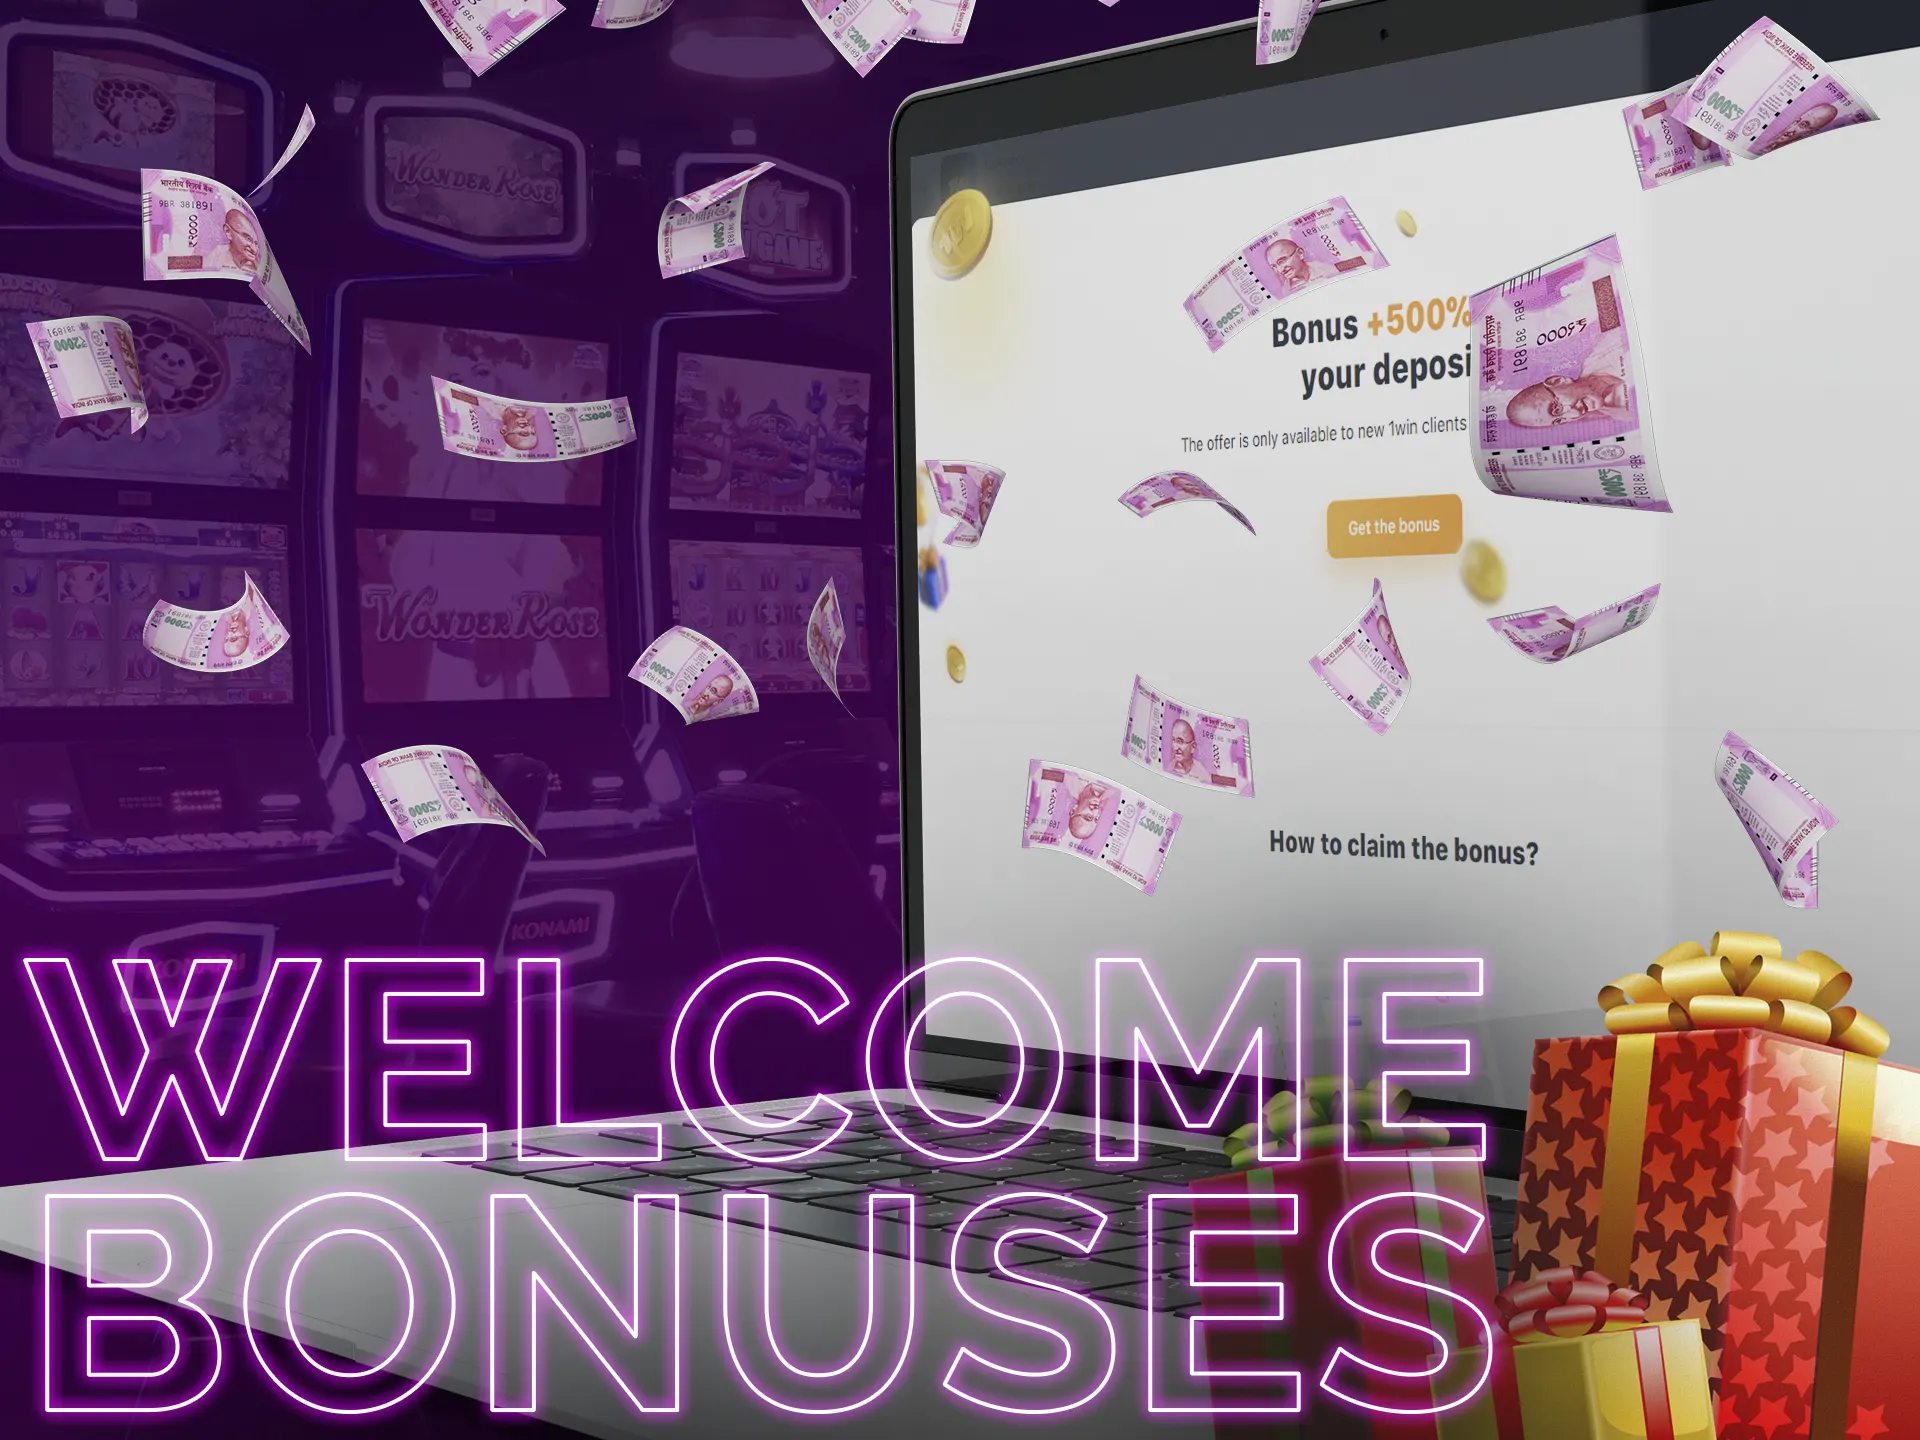 Welcome bonuses boost new players' bankrolls, enabling exploration of casino games with fewer personal funds.